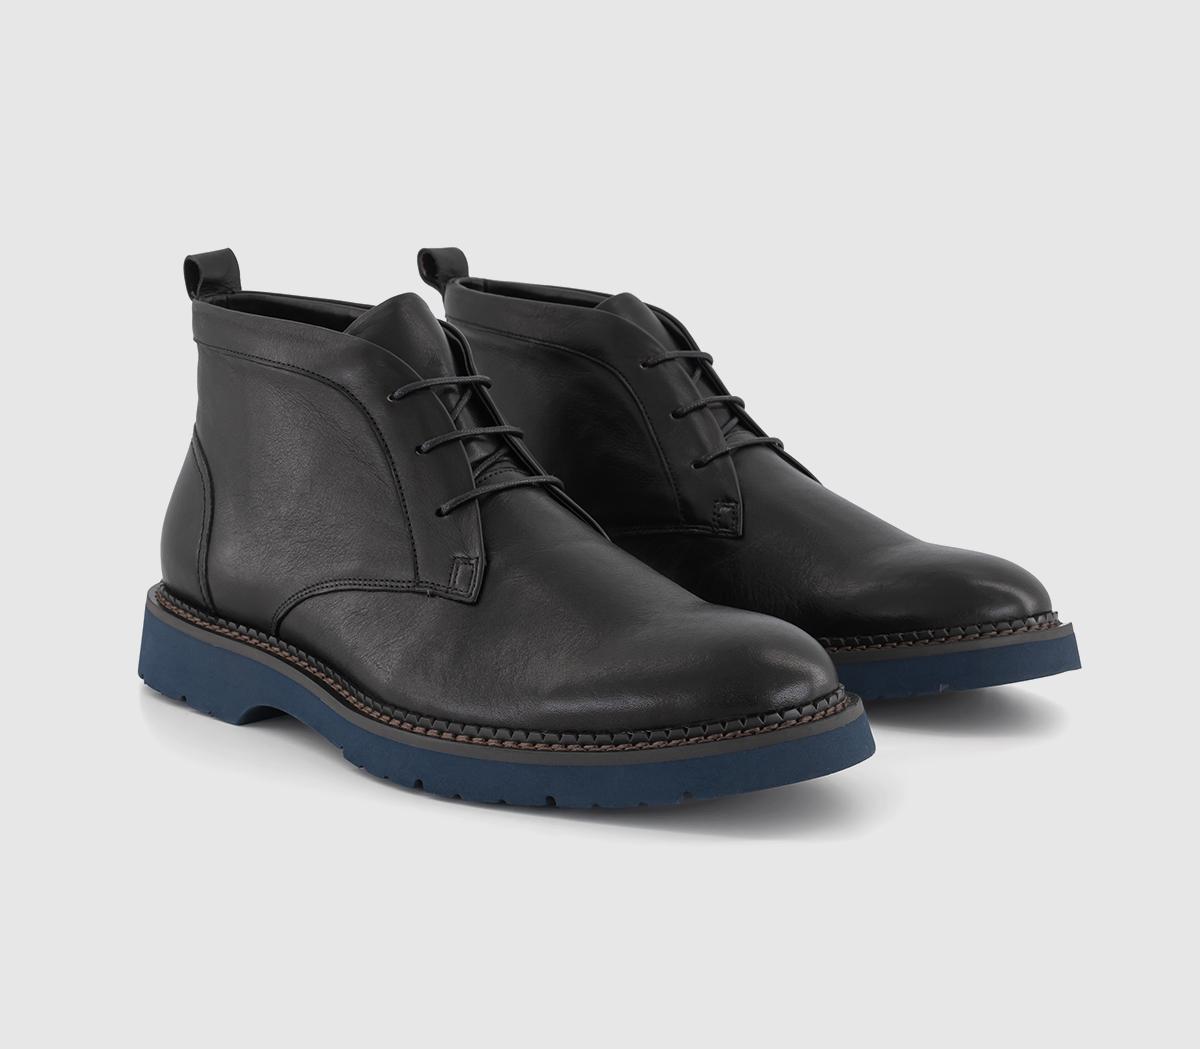 Poste Mens Petersham Contrast Outsole Chukka Boots Black Leather, 11